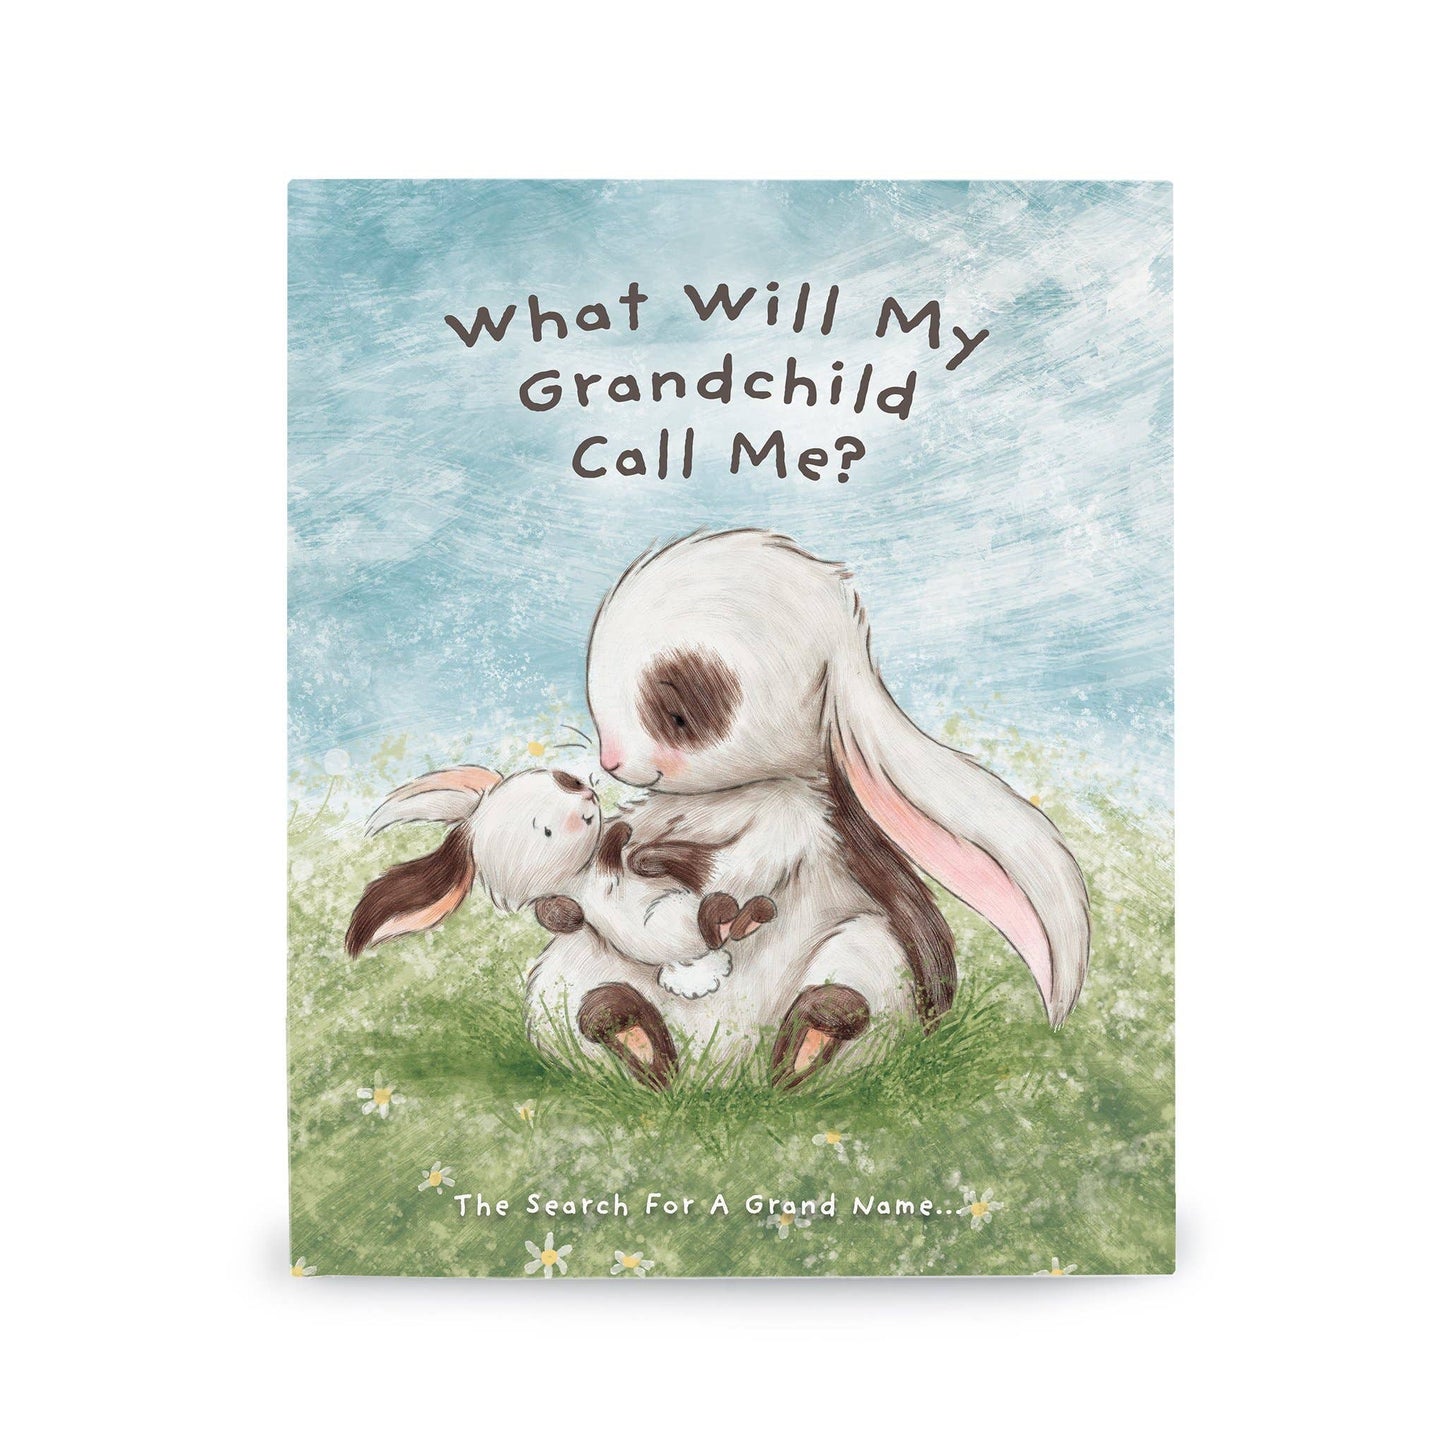 What Will My Grandchild Call Me? Story book